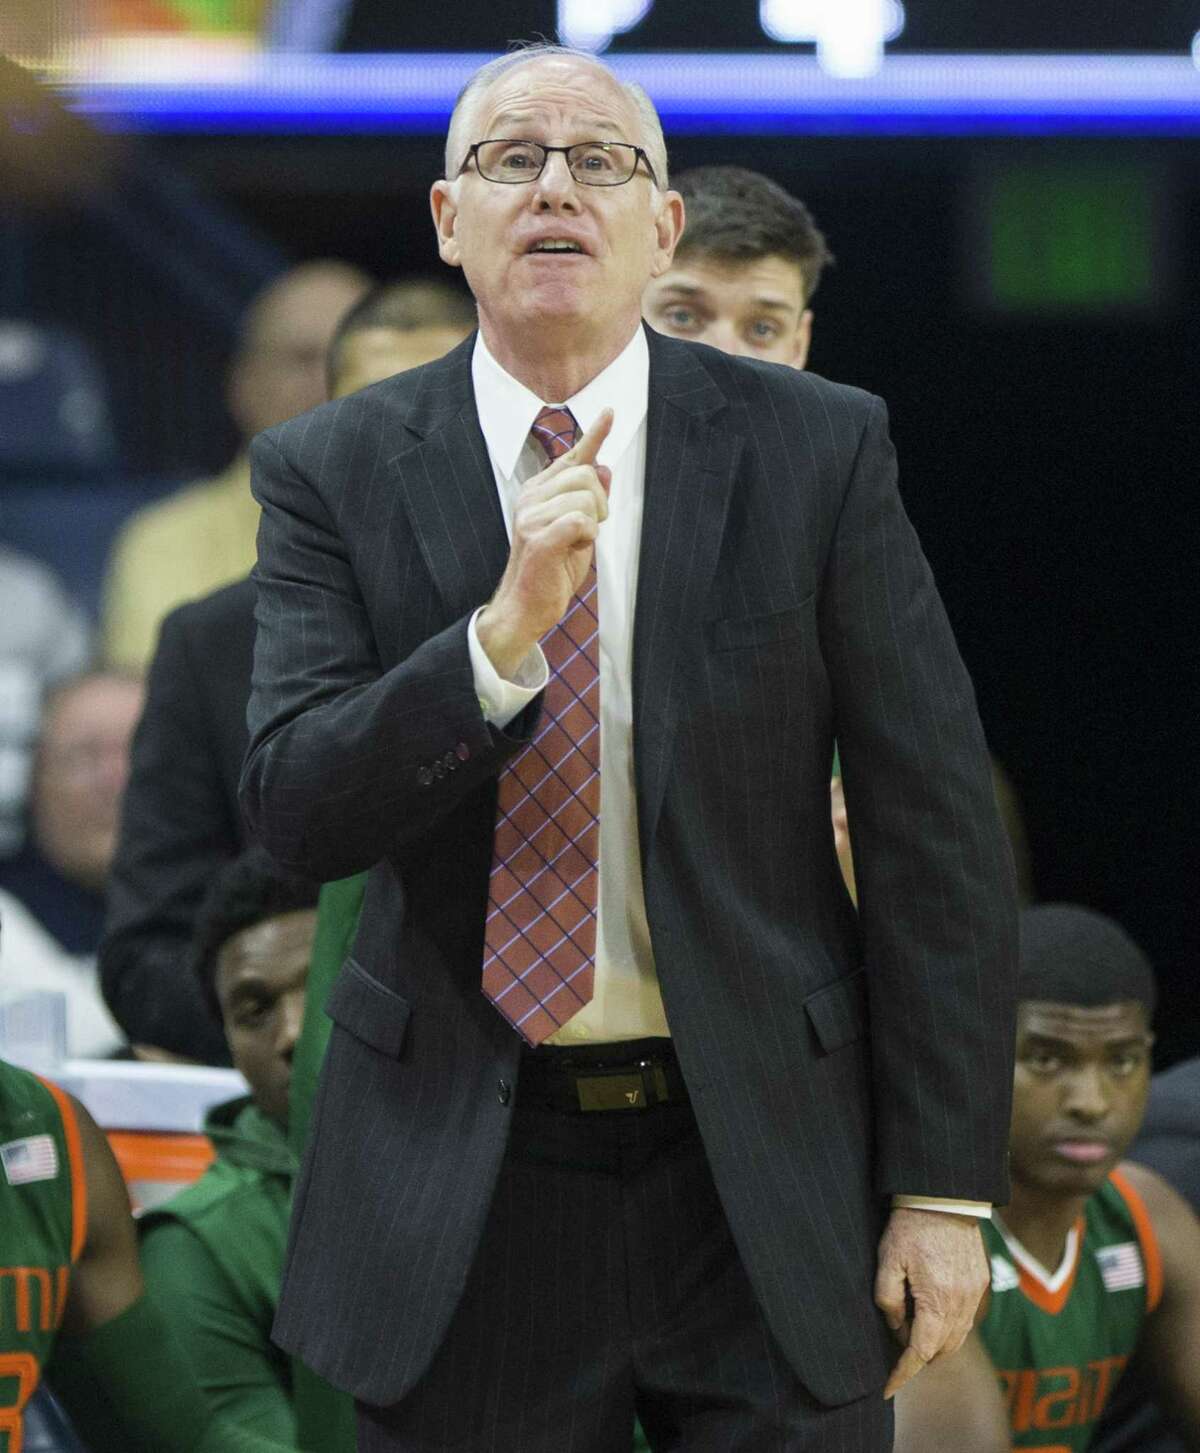 Miami coach Jim Larranaga compares Lonnie Walker IV, who spent one season with the Hurricanes, to Danny Green and Jazz rookie Donovan Mitchell, an All-Rookie team pick.